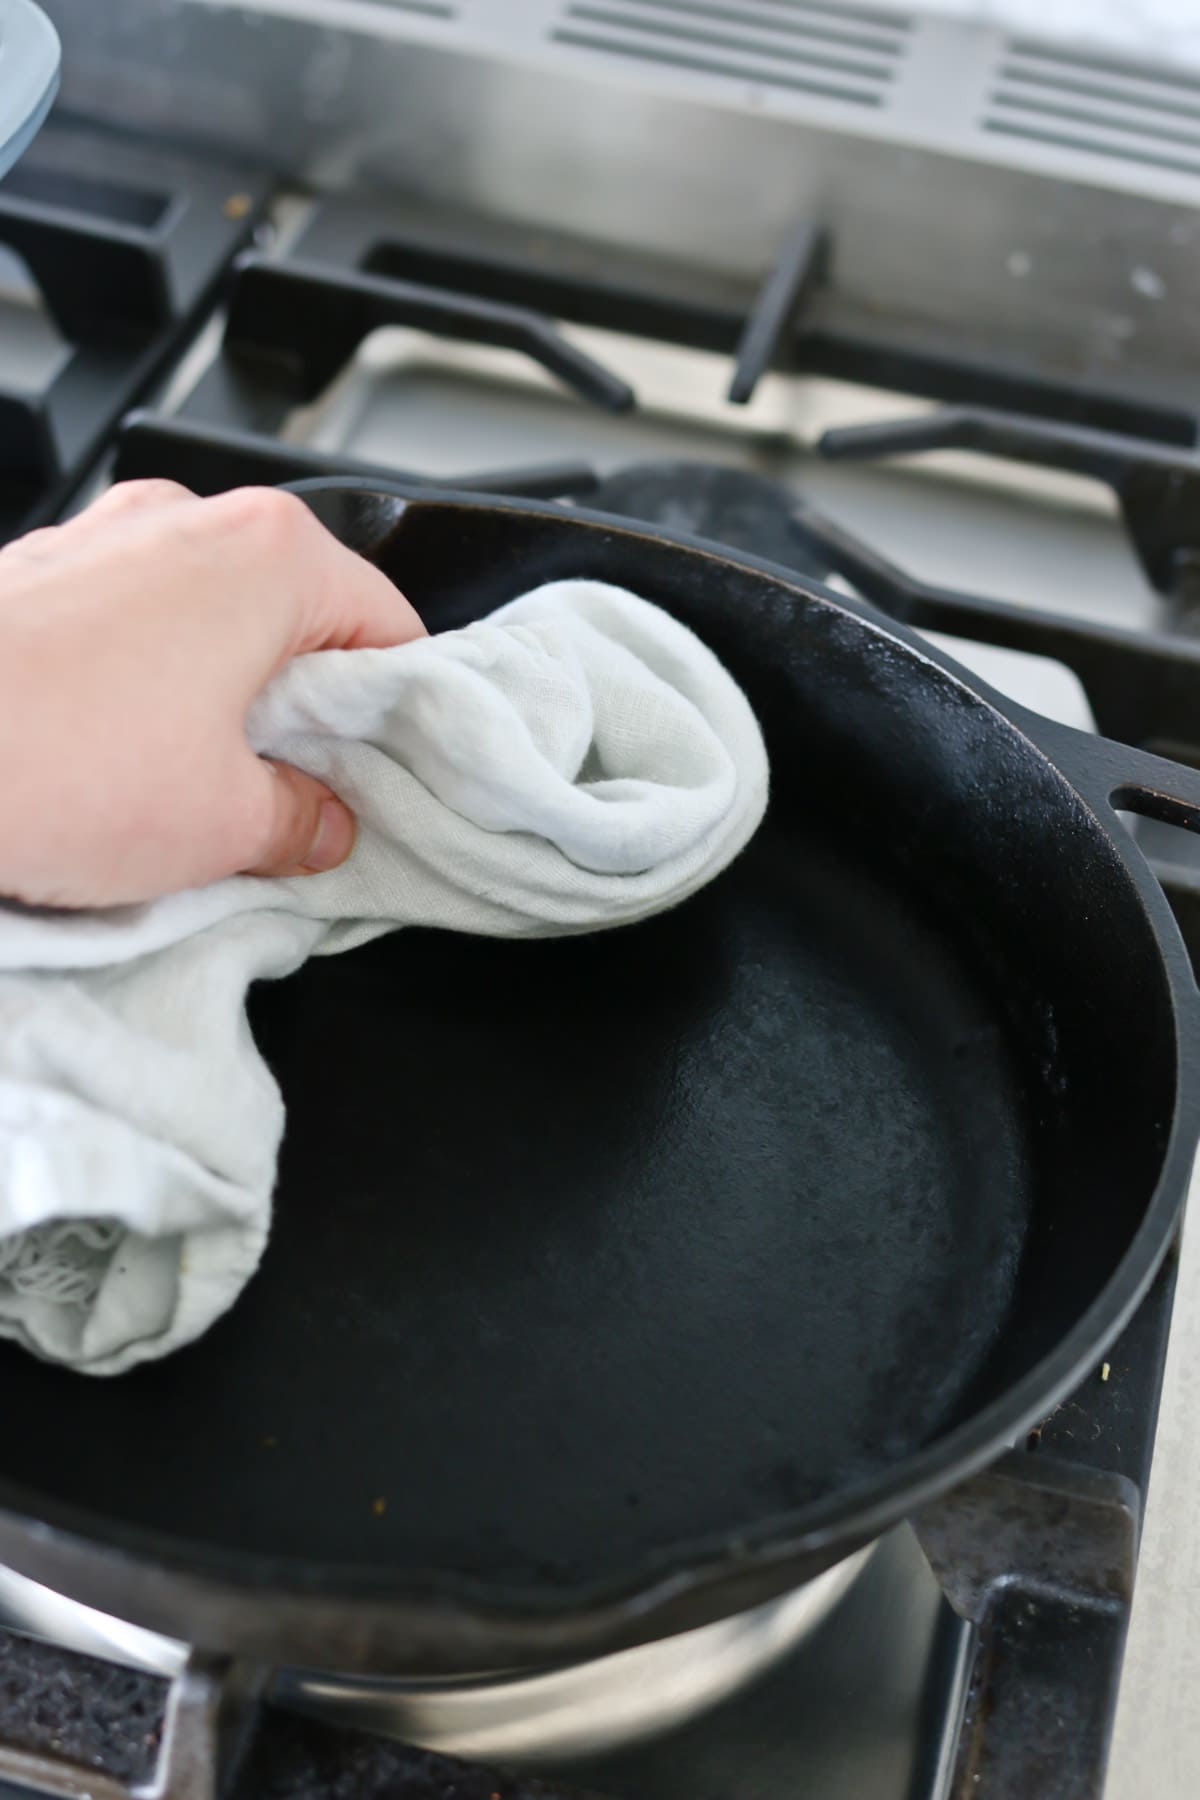 wipe down a cast iron pan with oil while hot.